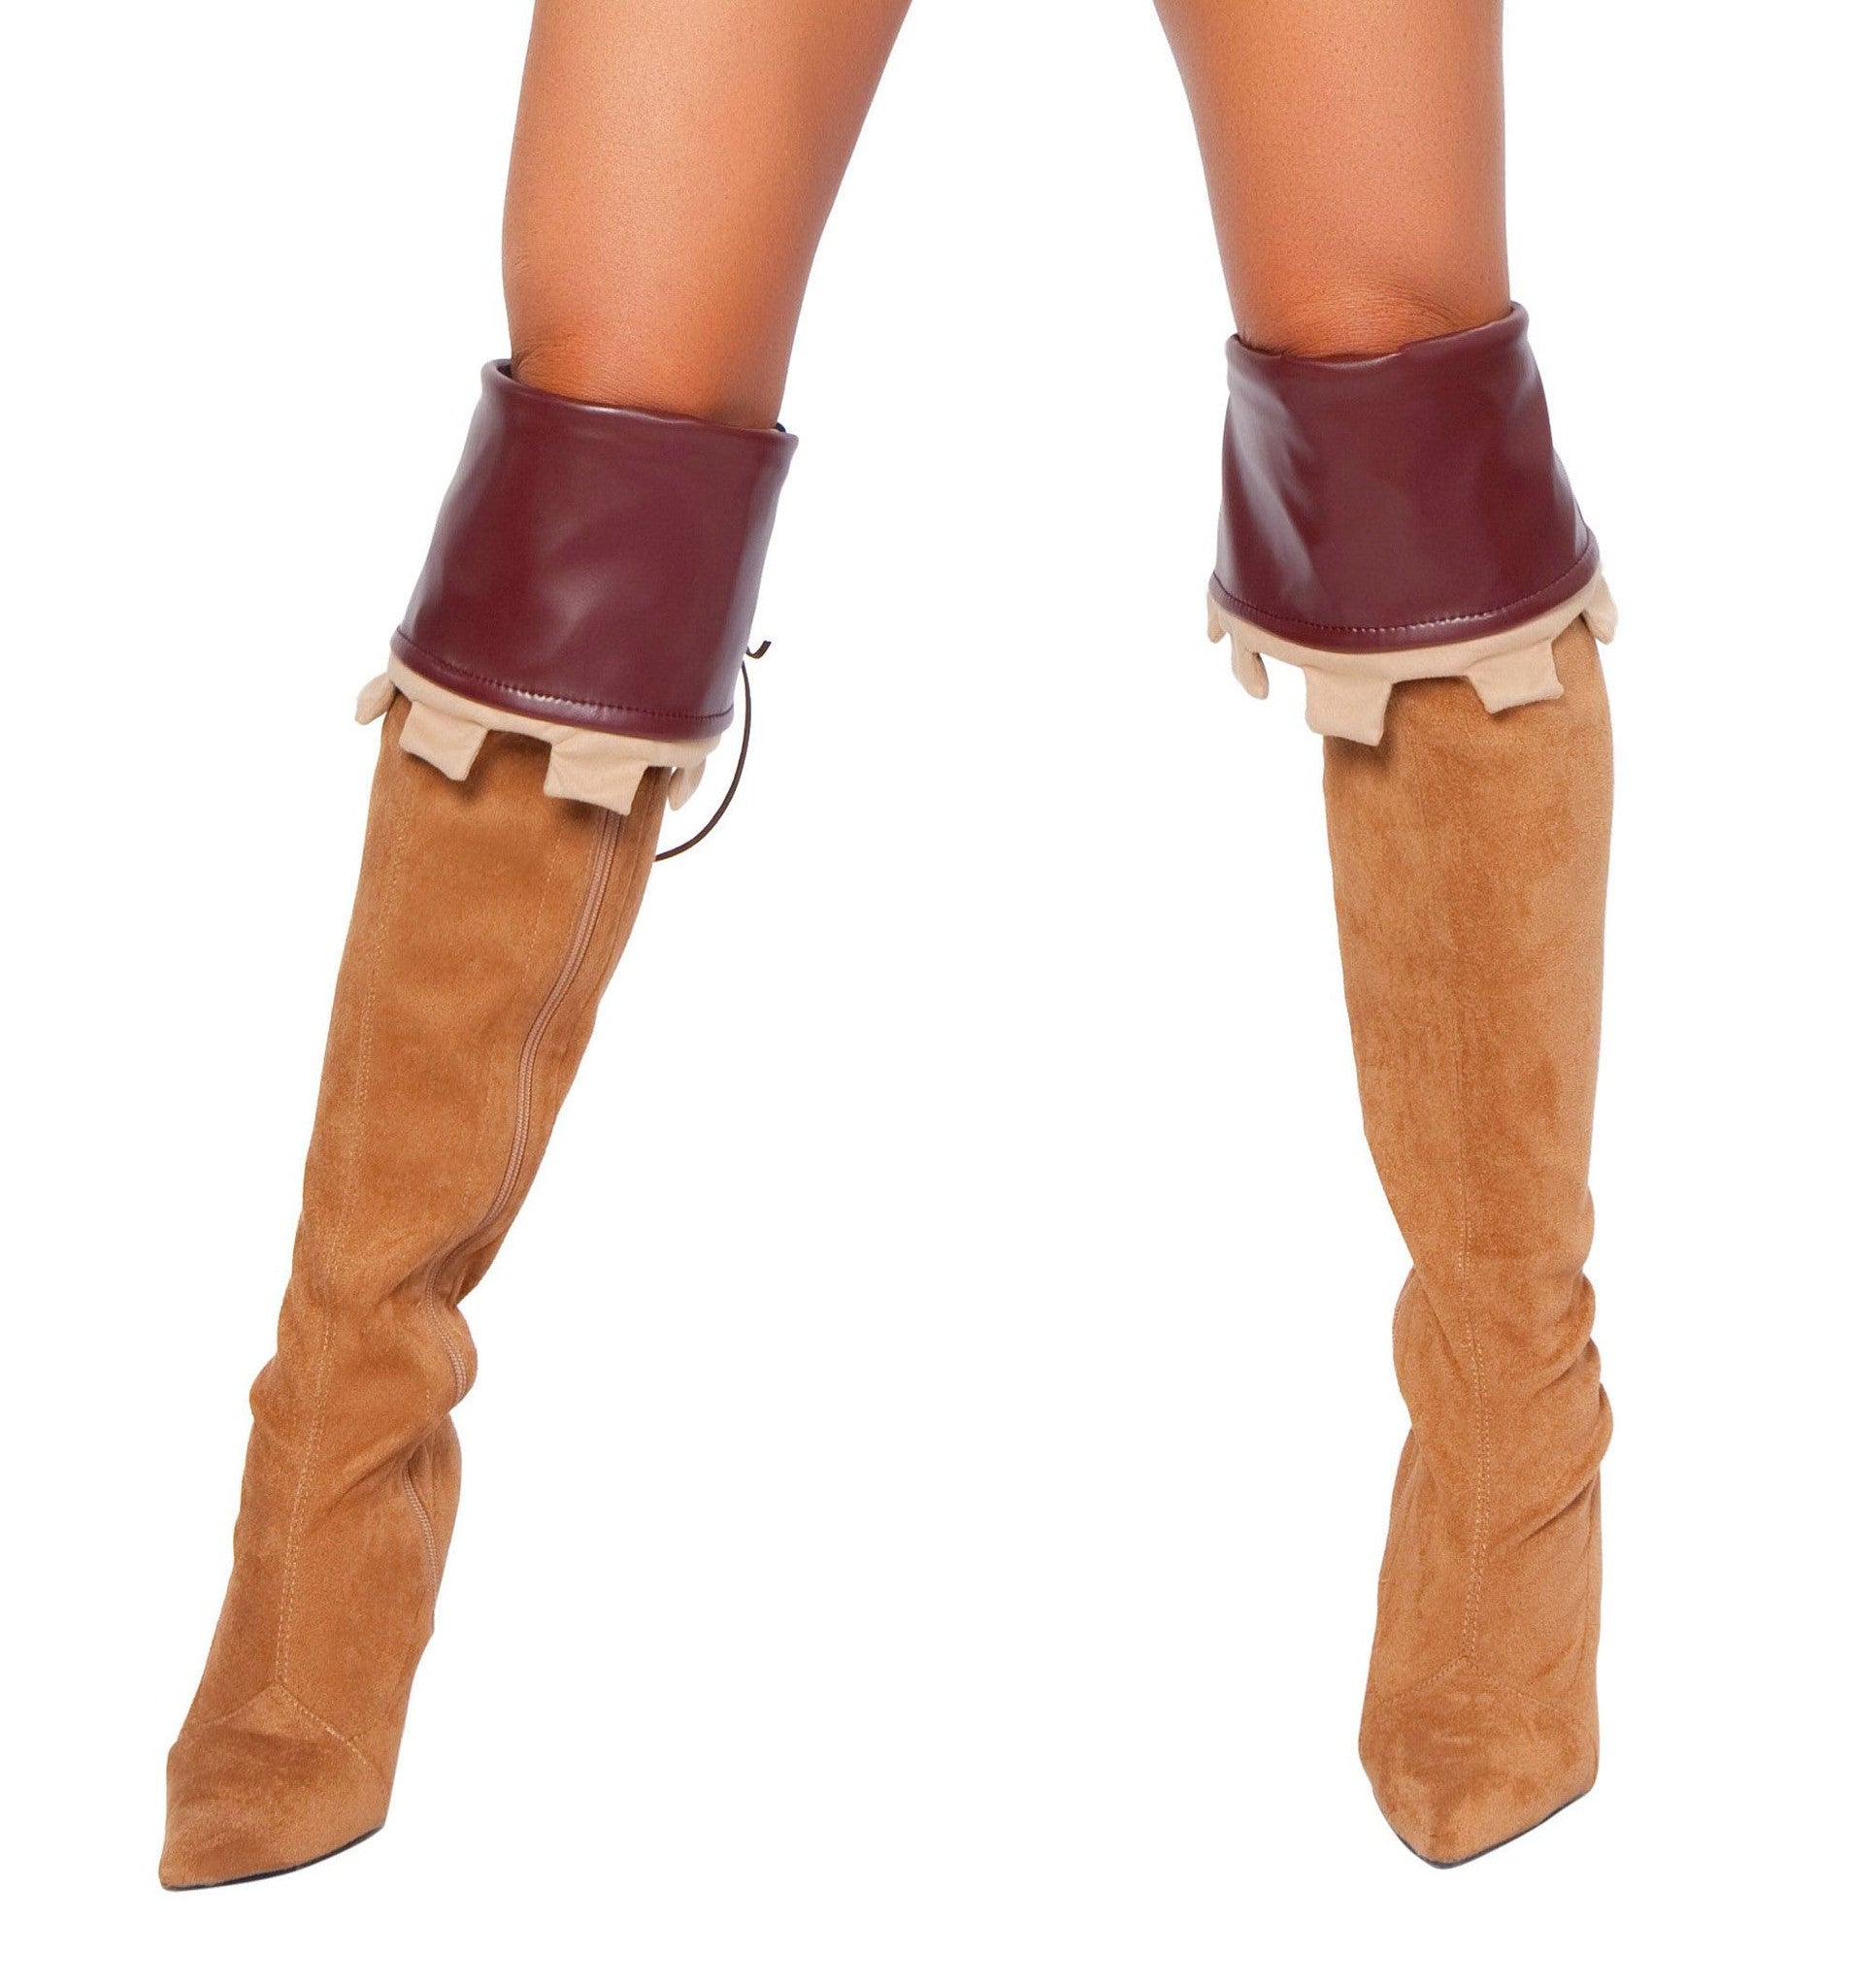 Sherwood Robyn Boot Covers